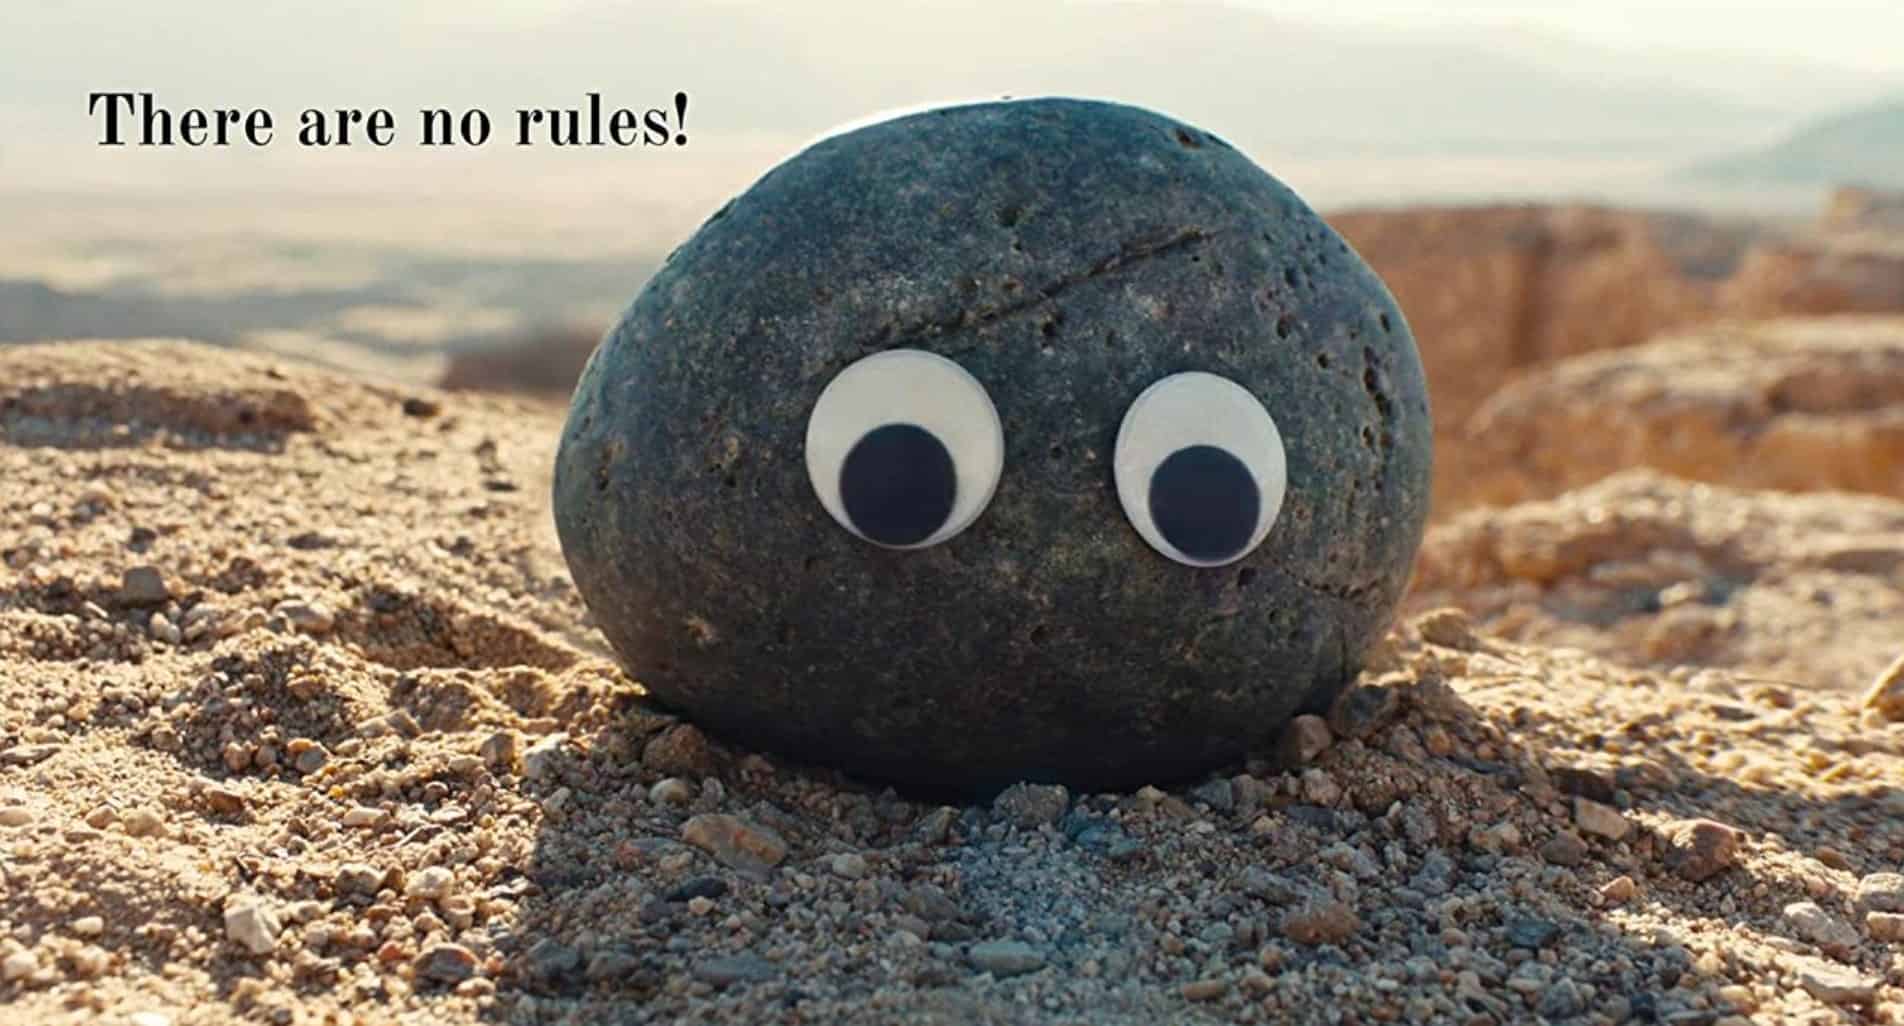 A rock with googly eyes on the ground in this image from SHOWTIME